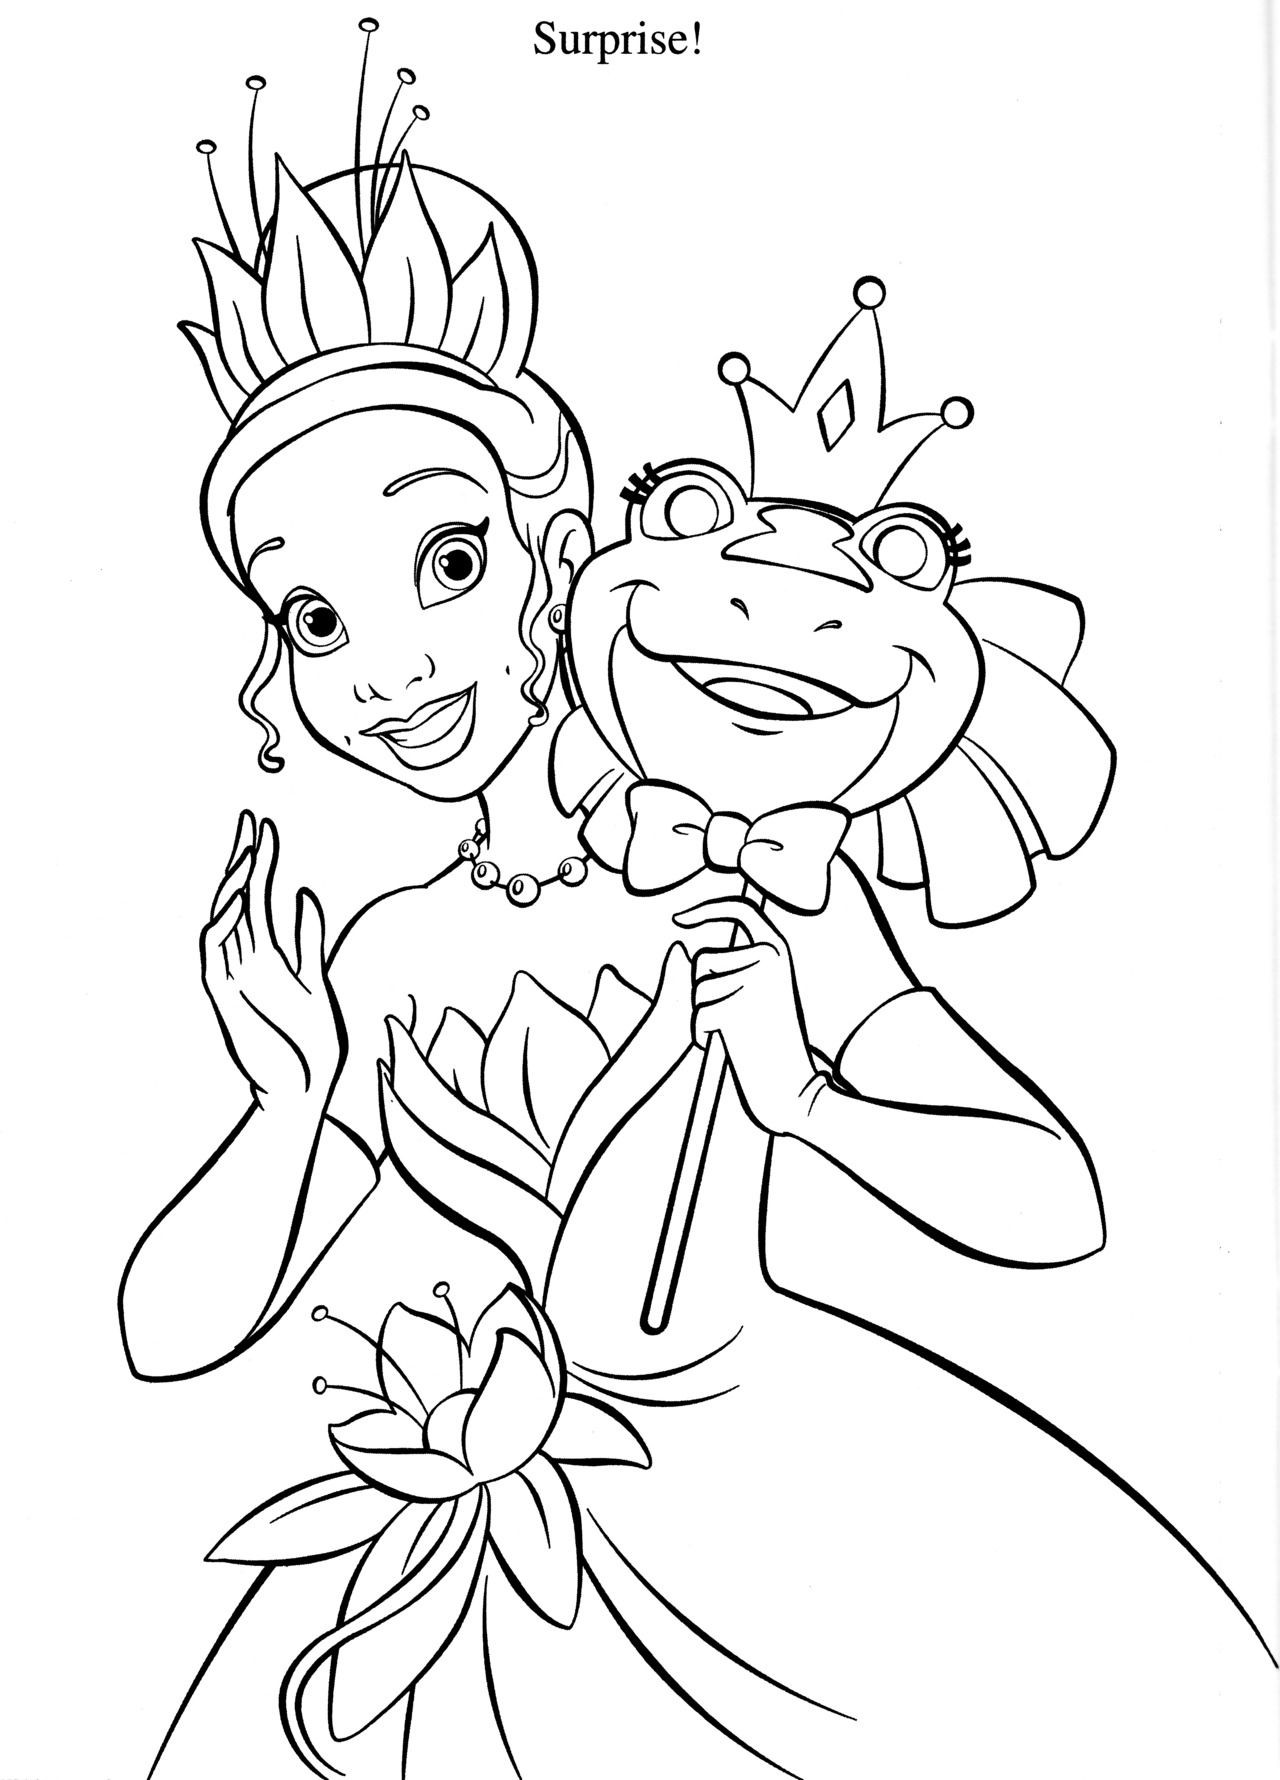 Coloring Pages For Girls Mouted Princess
 The Princess & the Frog Coloring Page